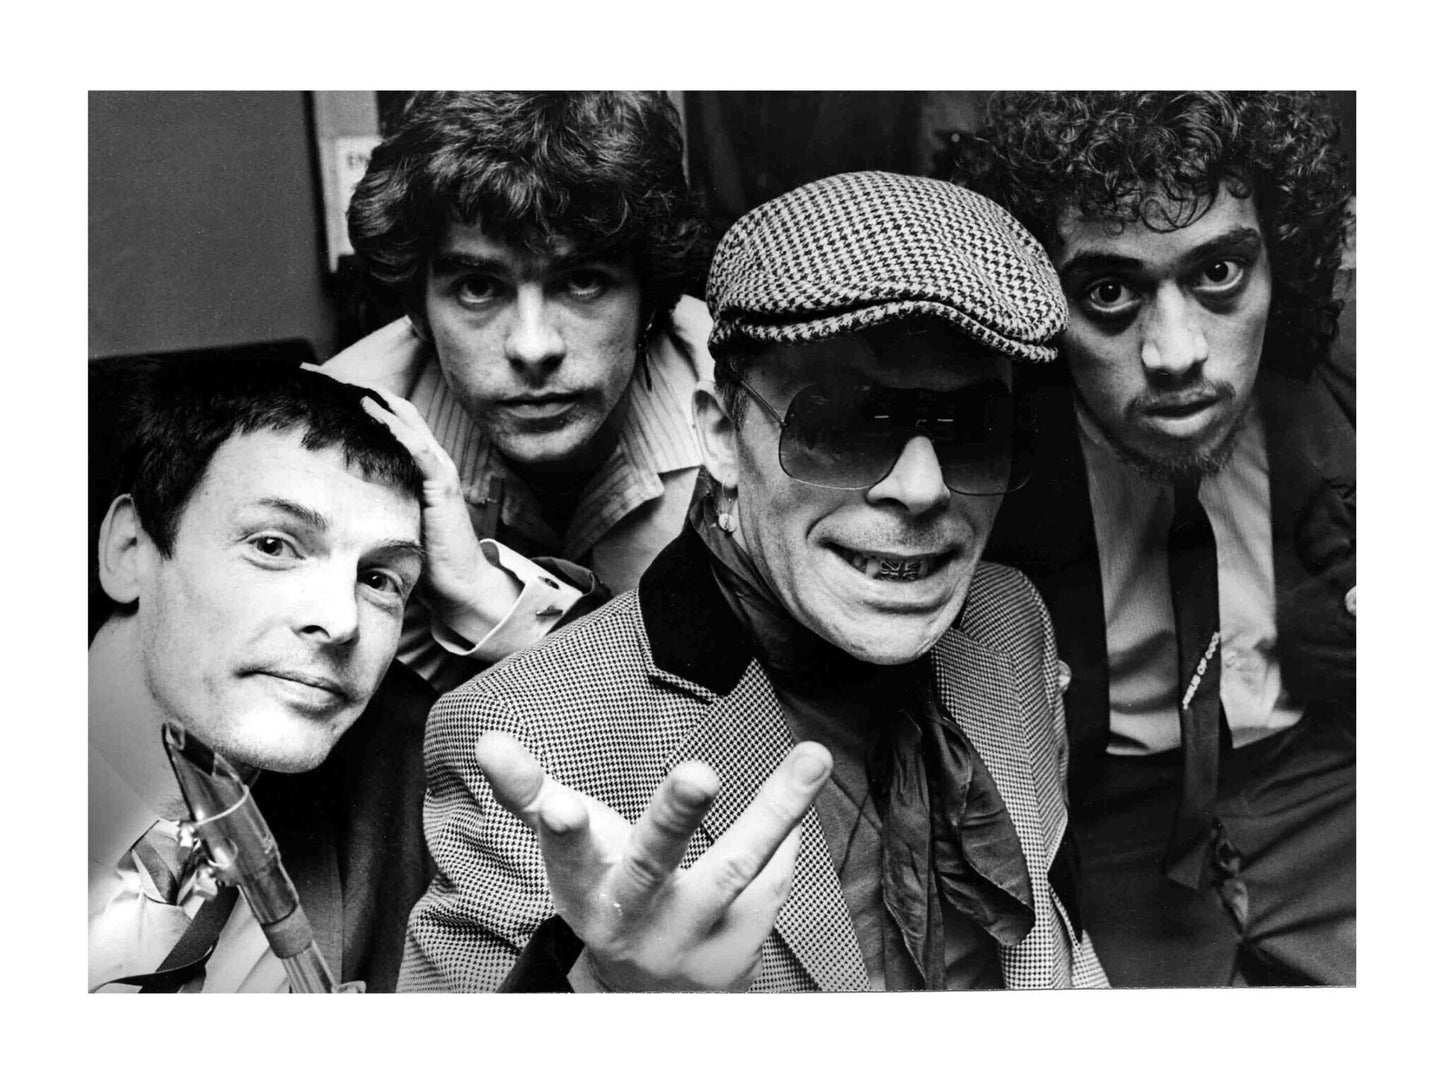 Ian Dury and the Blockheads - A Band Portrait at the Top Rank Suite, Wales, UK, 1978 Print (1/2)